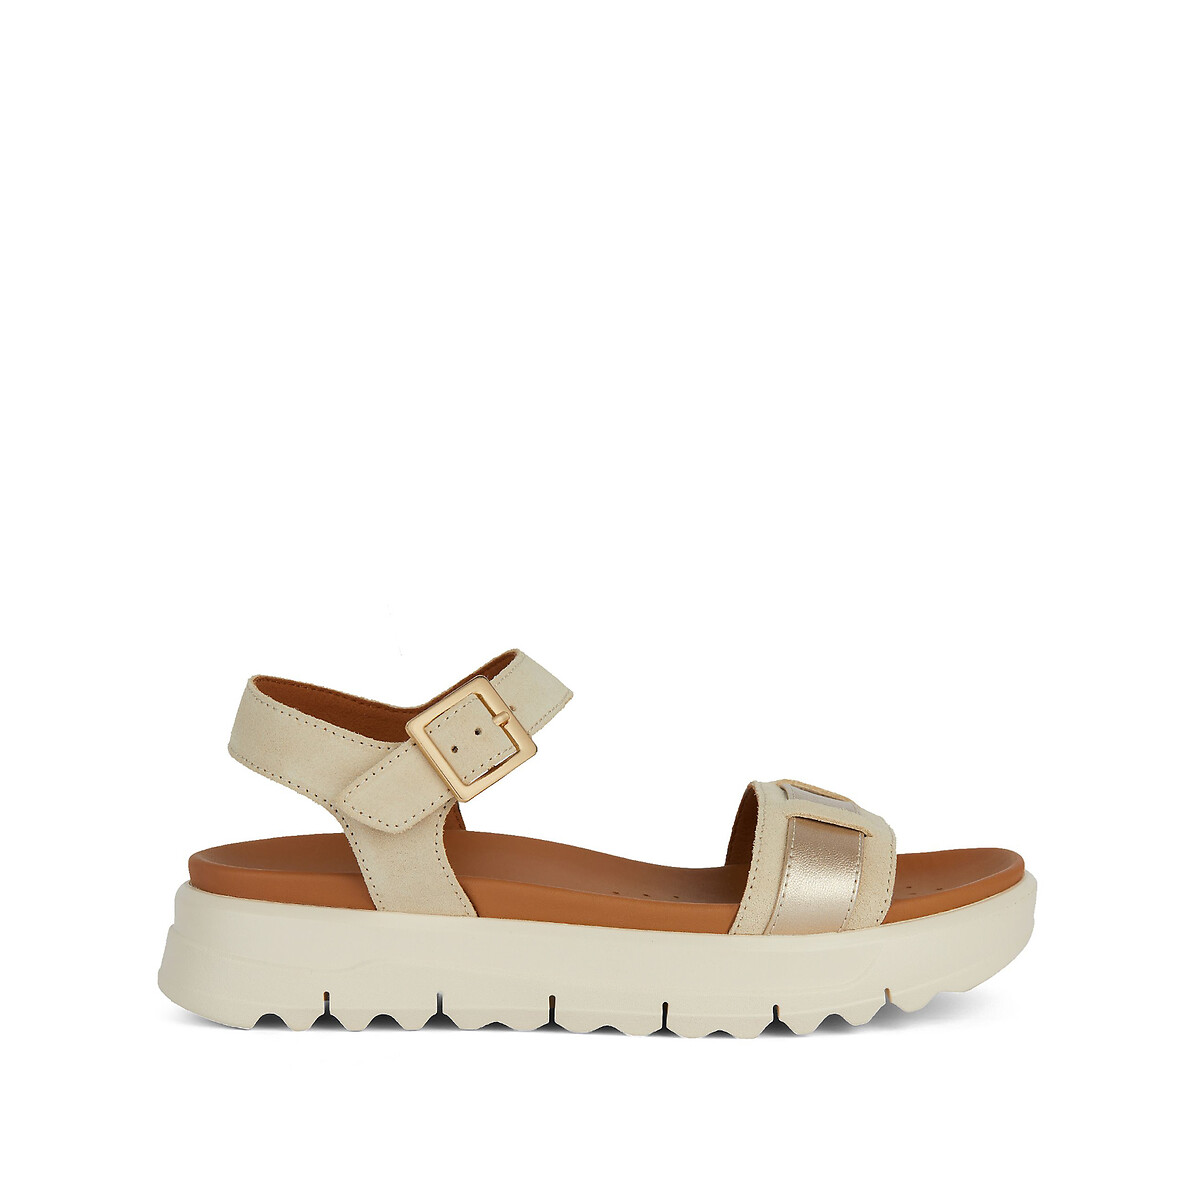 Xand 2.1S Wedge Sandals in Suede